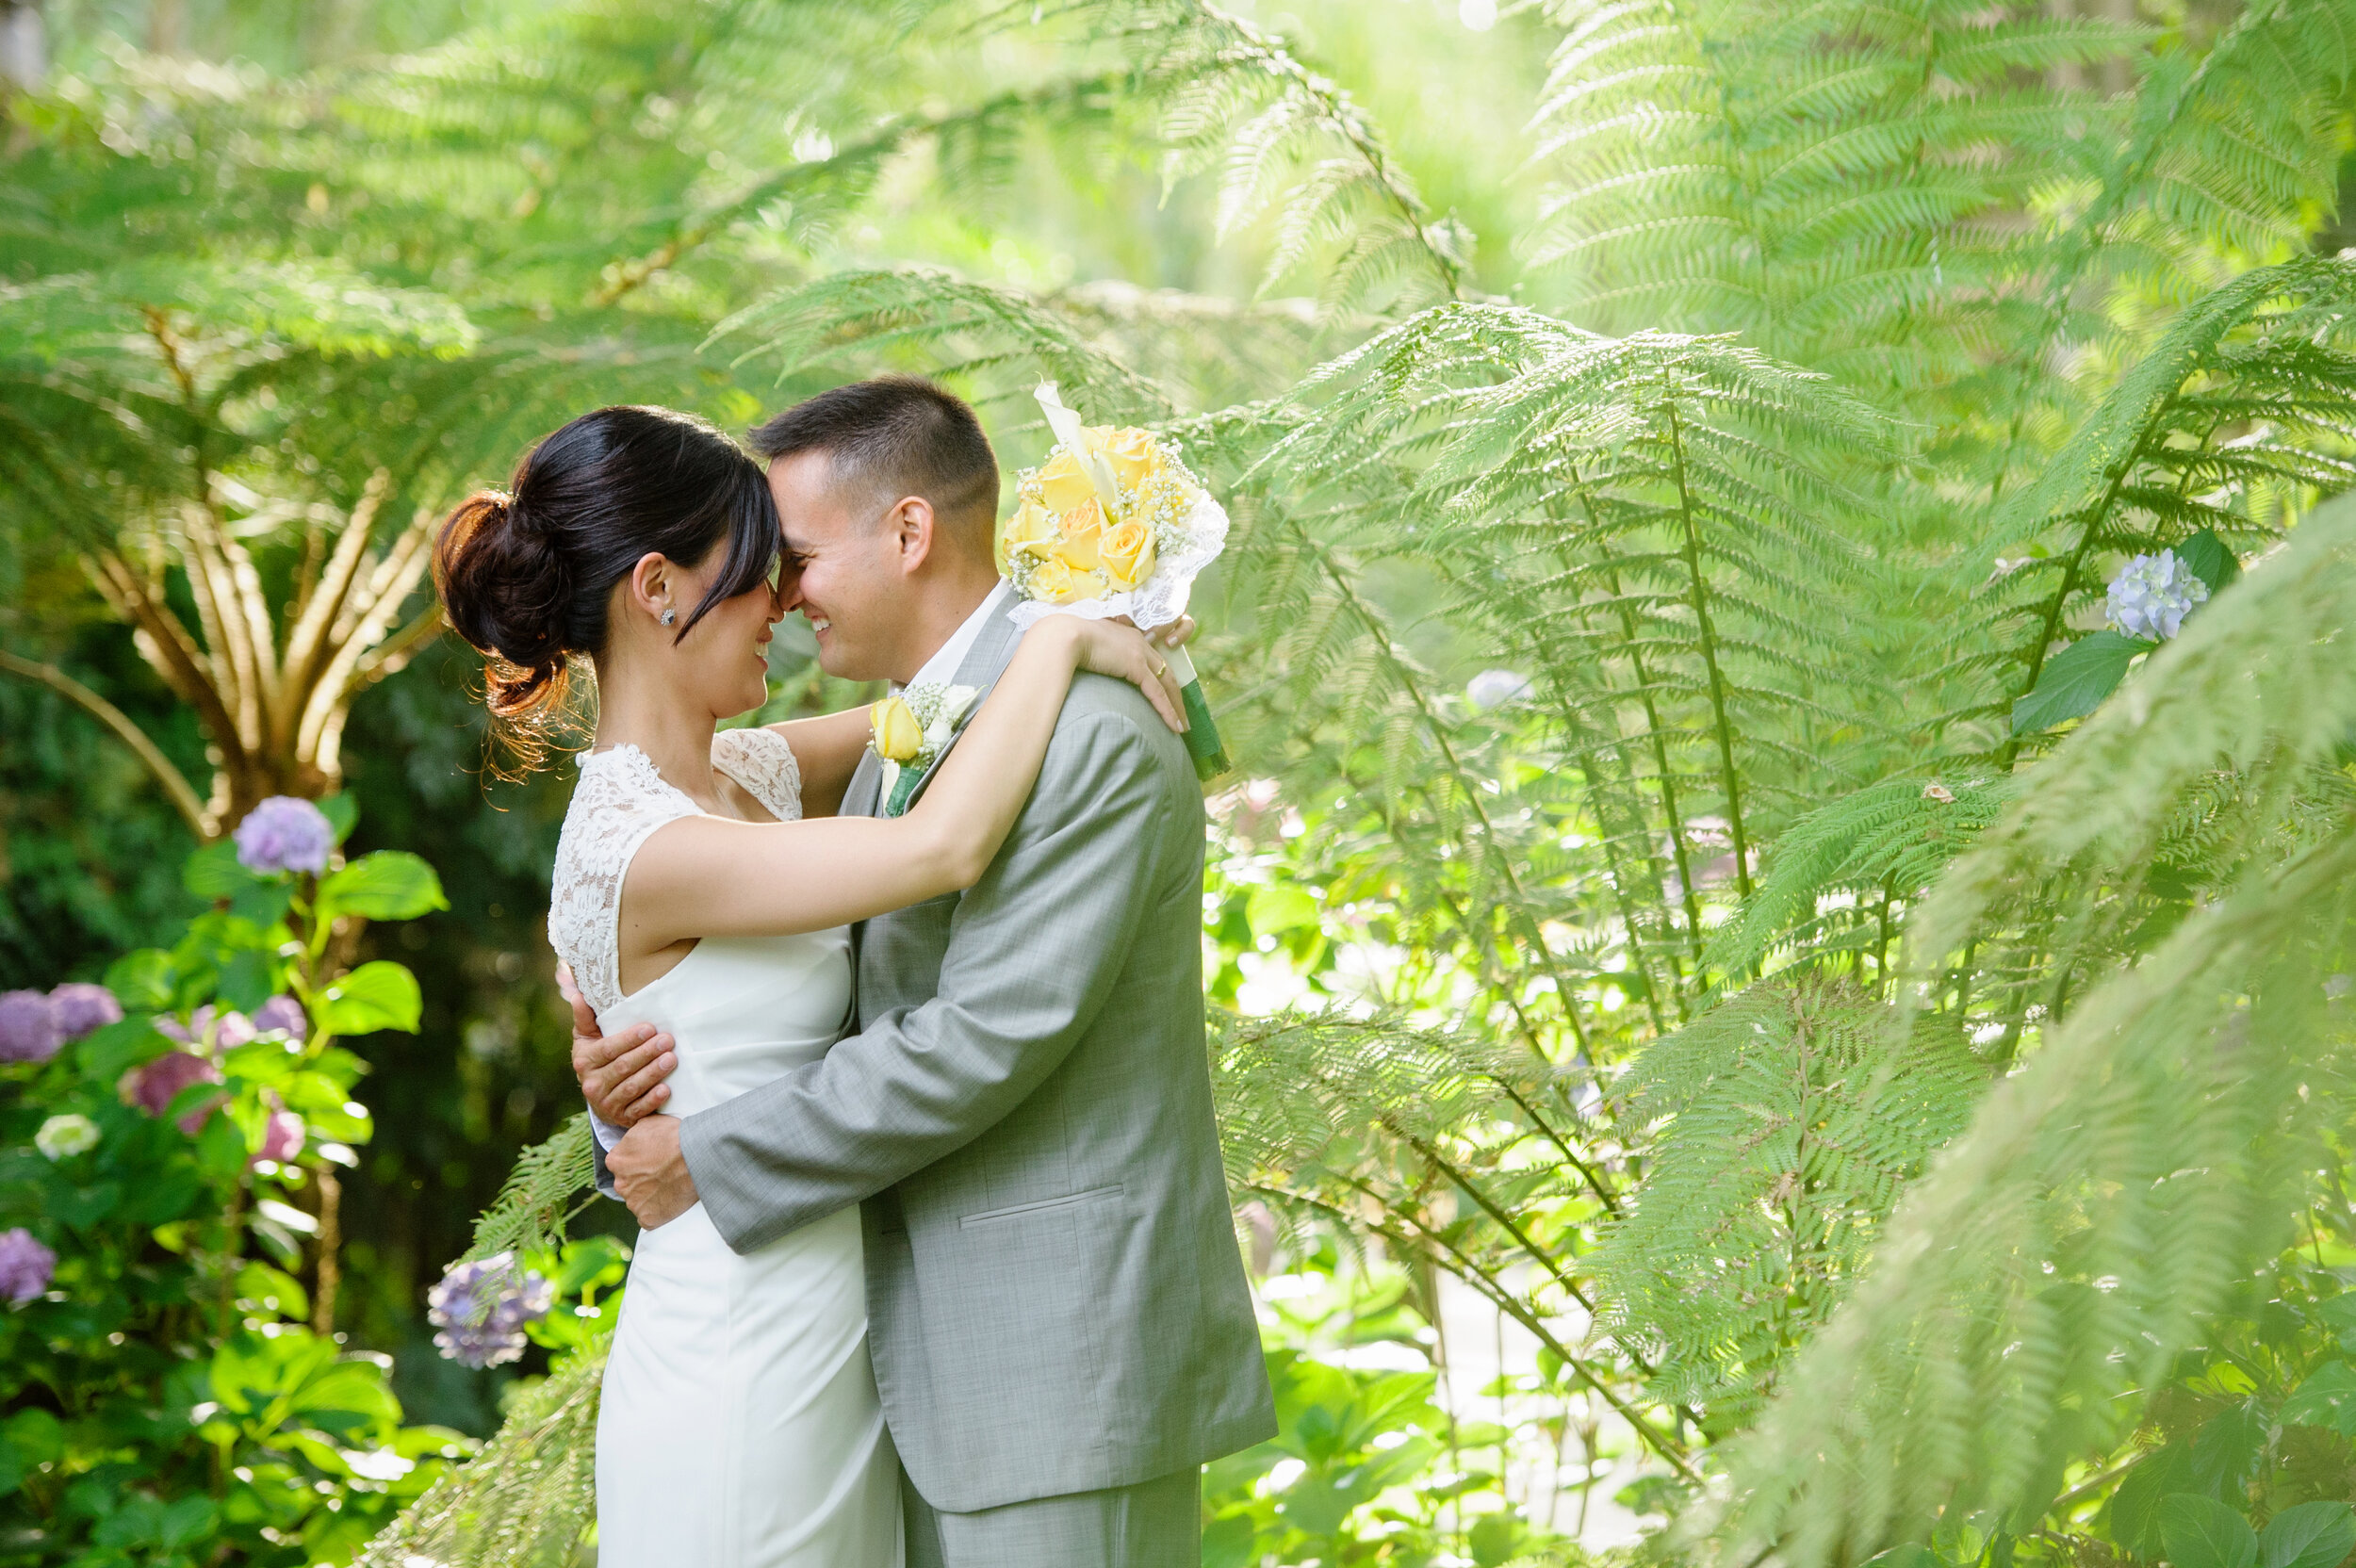 Photo of a bride and groom embracing outdoors